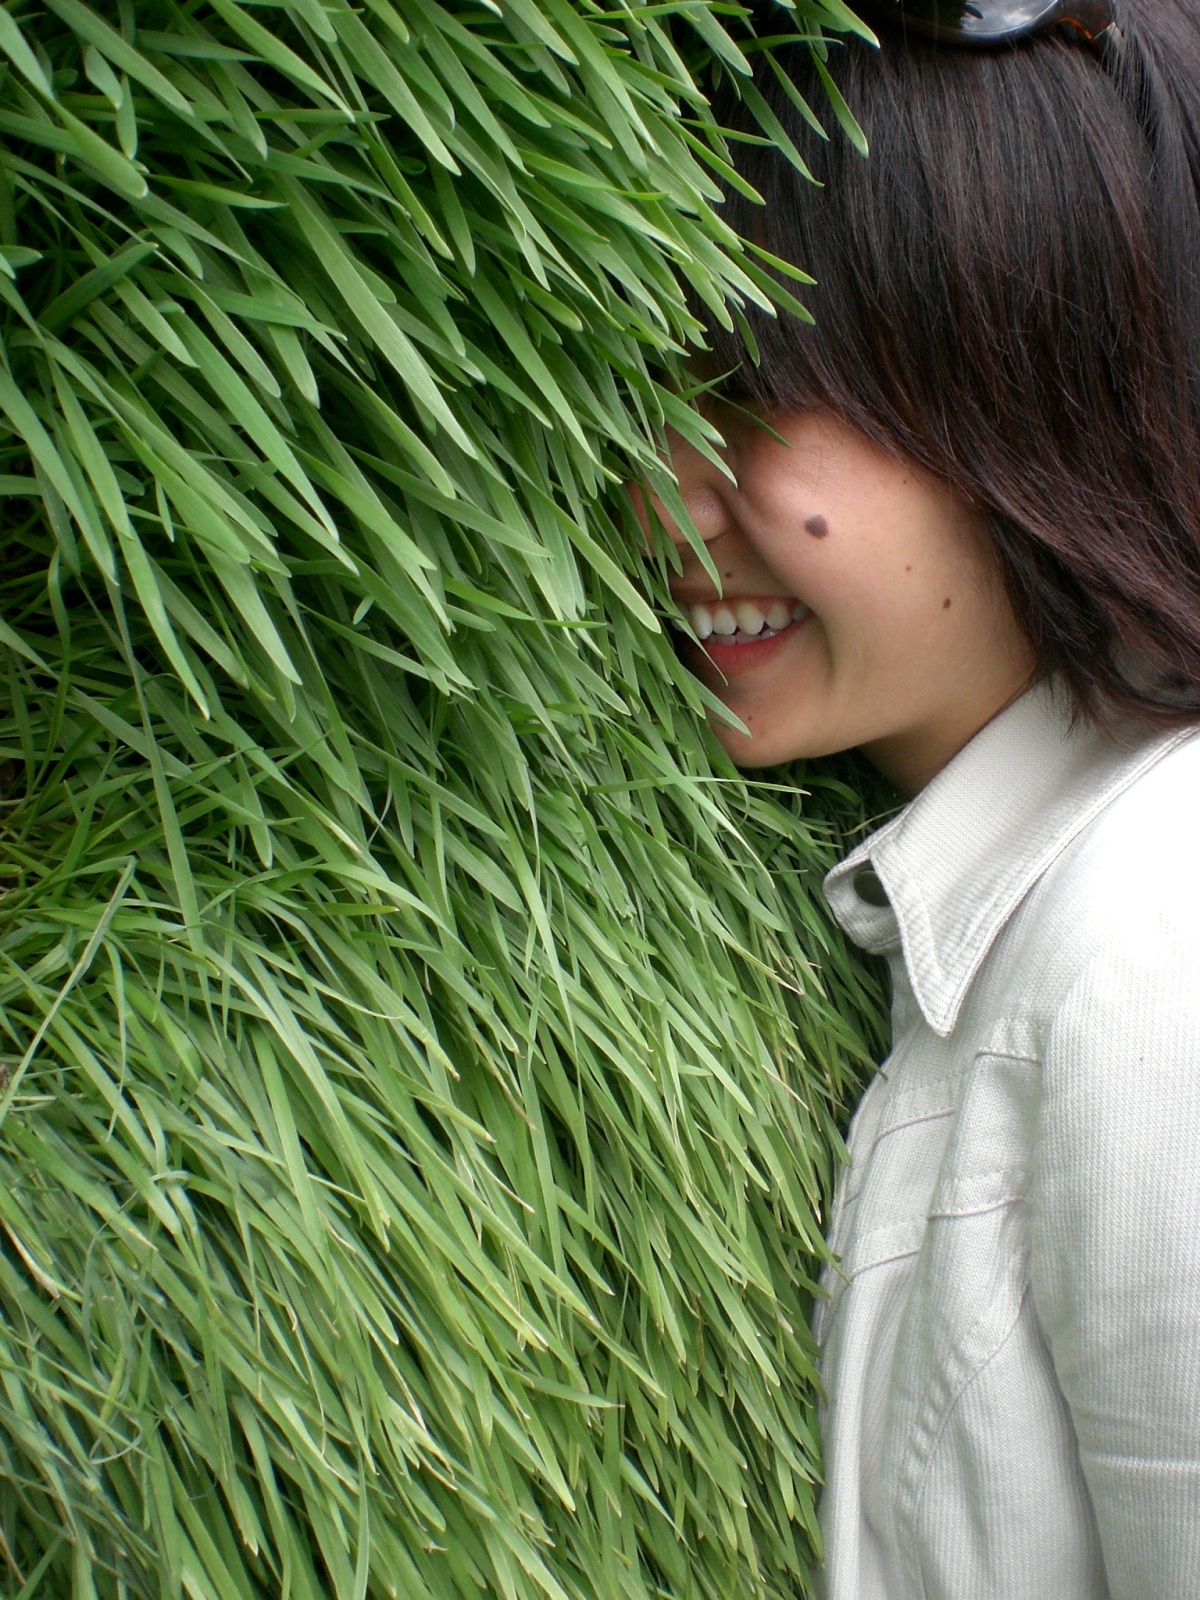 Picture of Lian Chikako Chang smiling, with her face buried in a wall of well-kept green grass.